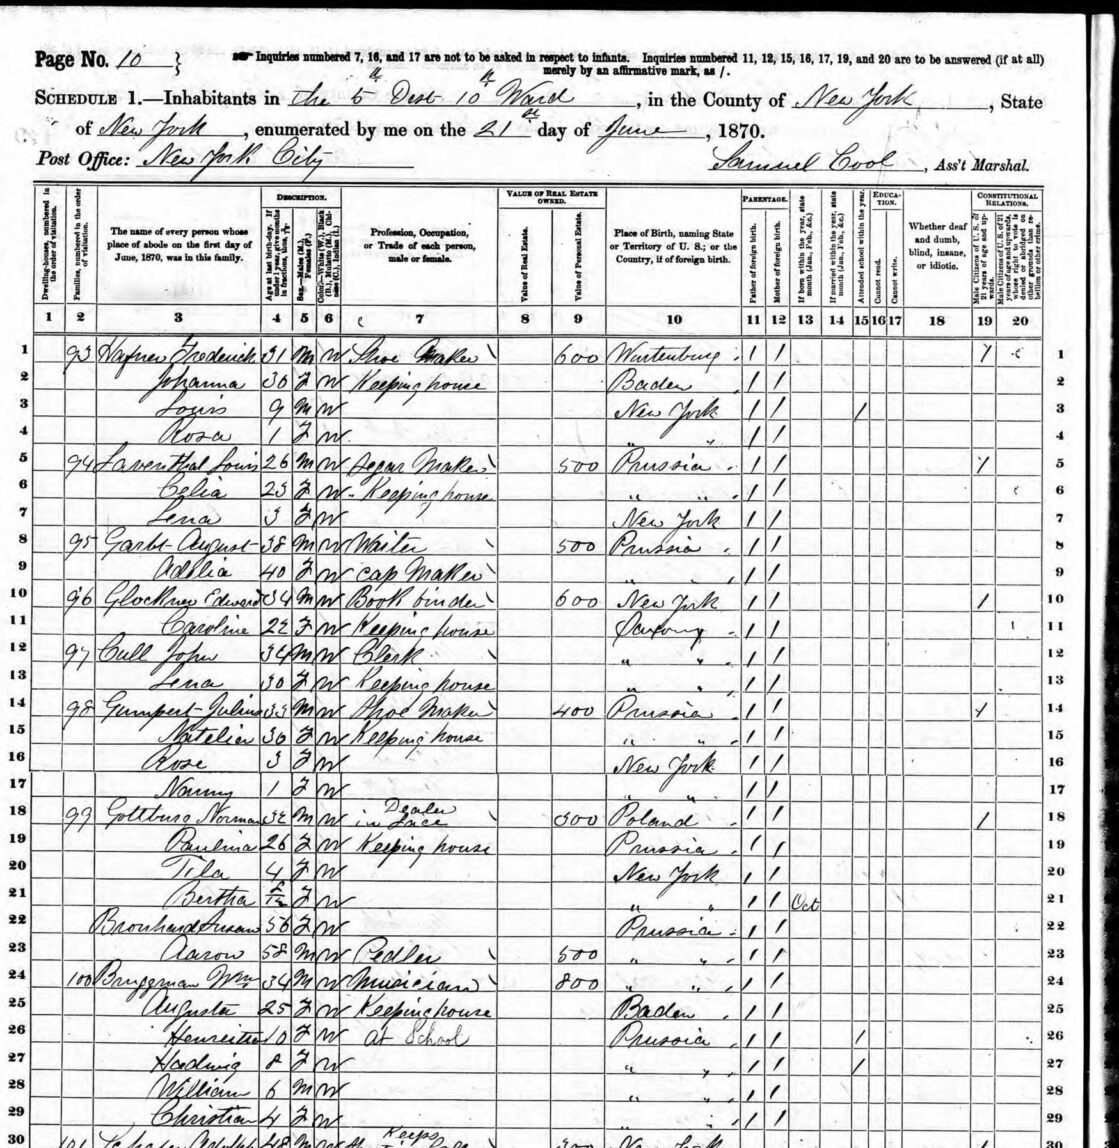 Page 10 from a 1870 New York City census document listing resident names and other information, such as occupation, race, sex, and age